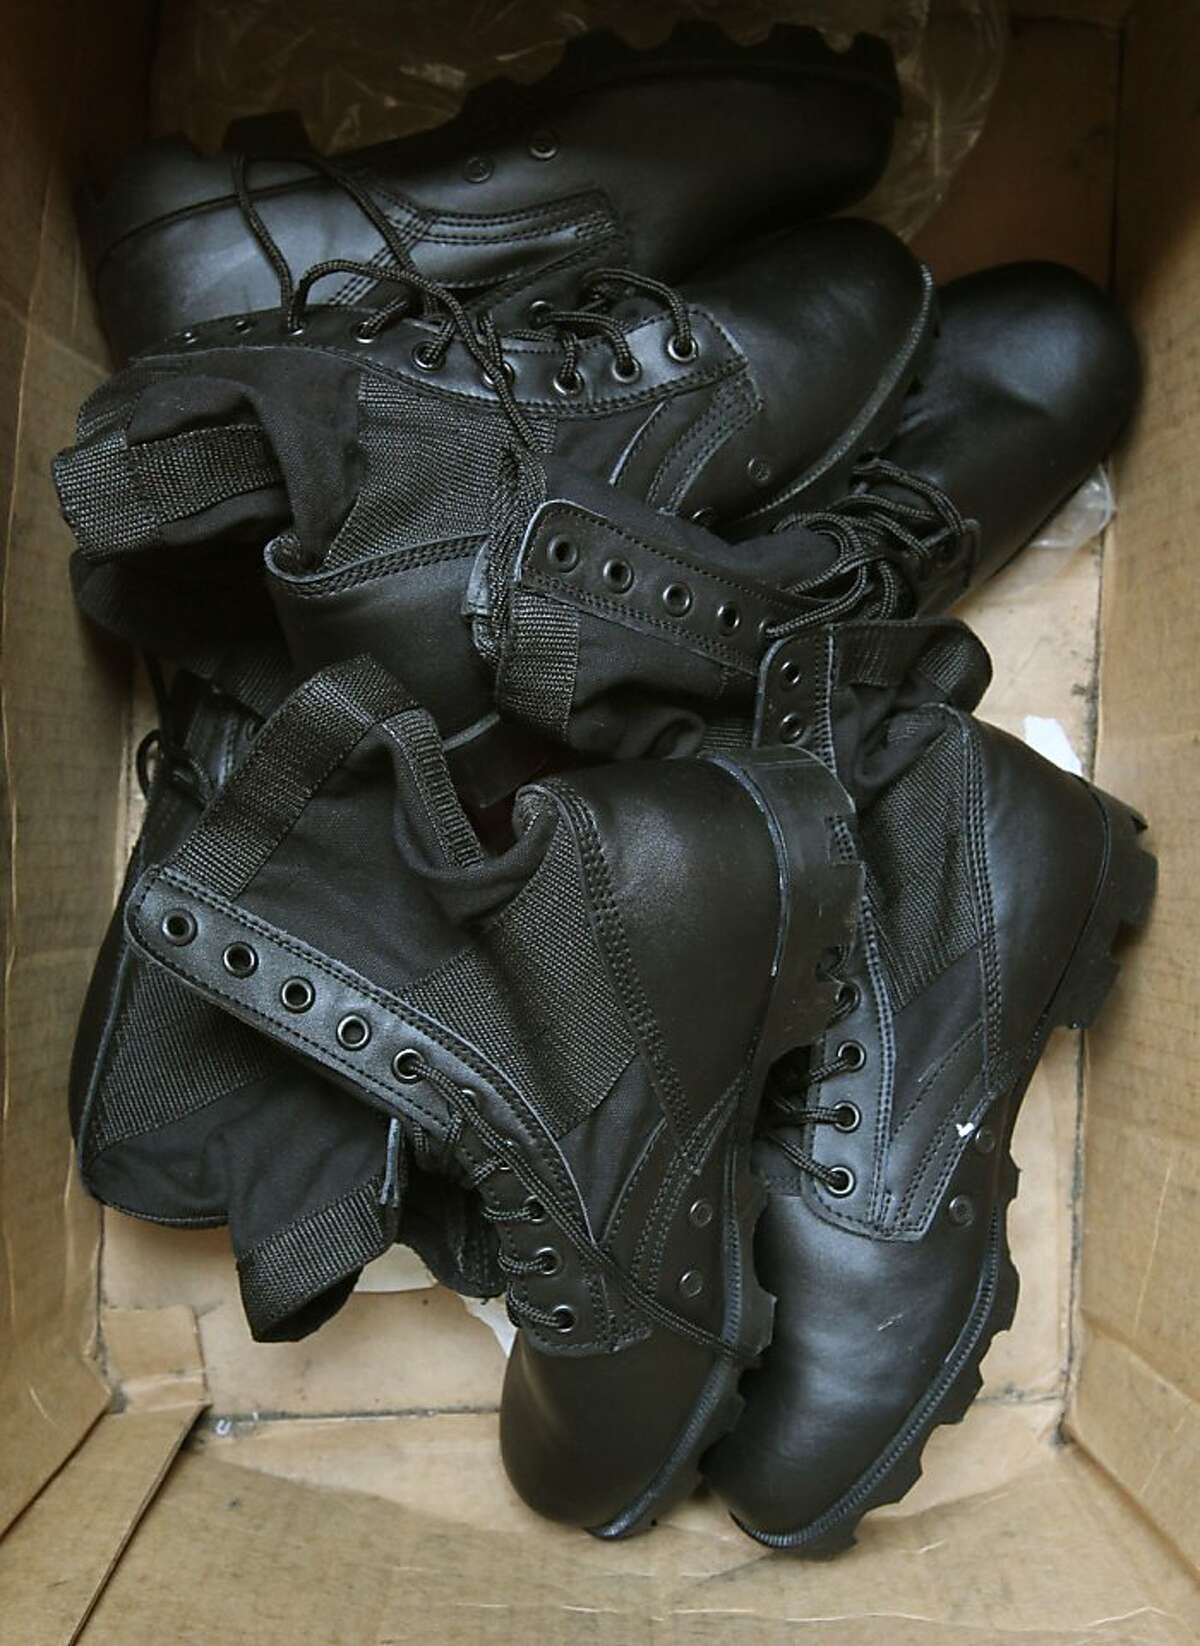 The black "Condor" boot, on Friday May 4, 2012, one of the items popular with the protesters. Berkeley Surplus Store in Berkely, Ca. believes that it's store on San Pablo Ave. is a source of suppplies and equipment for many members of the Bay Area wide Occupy movement.